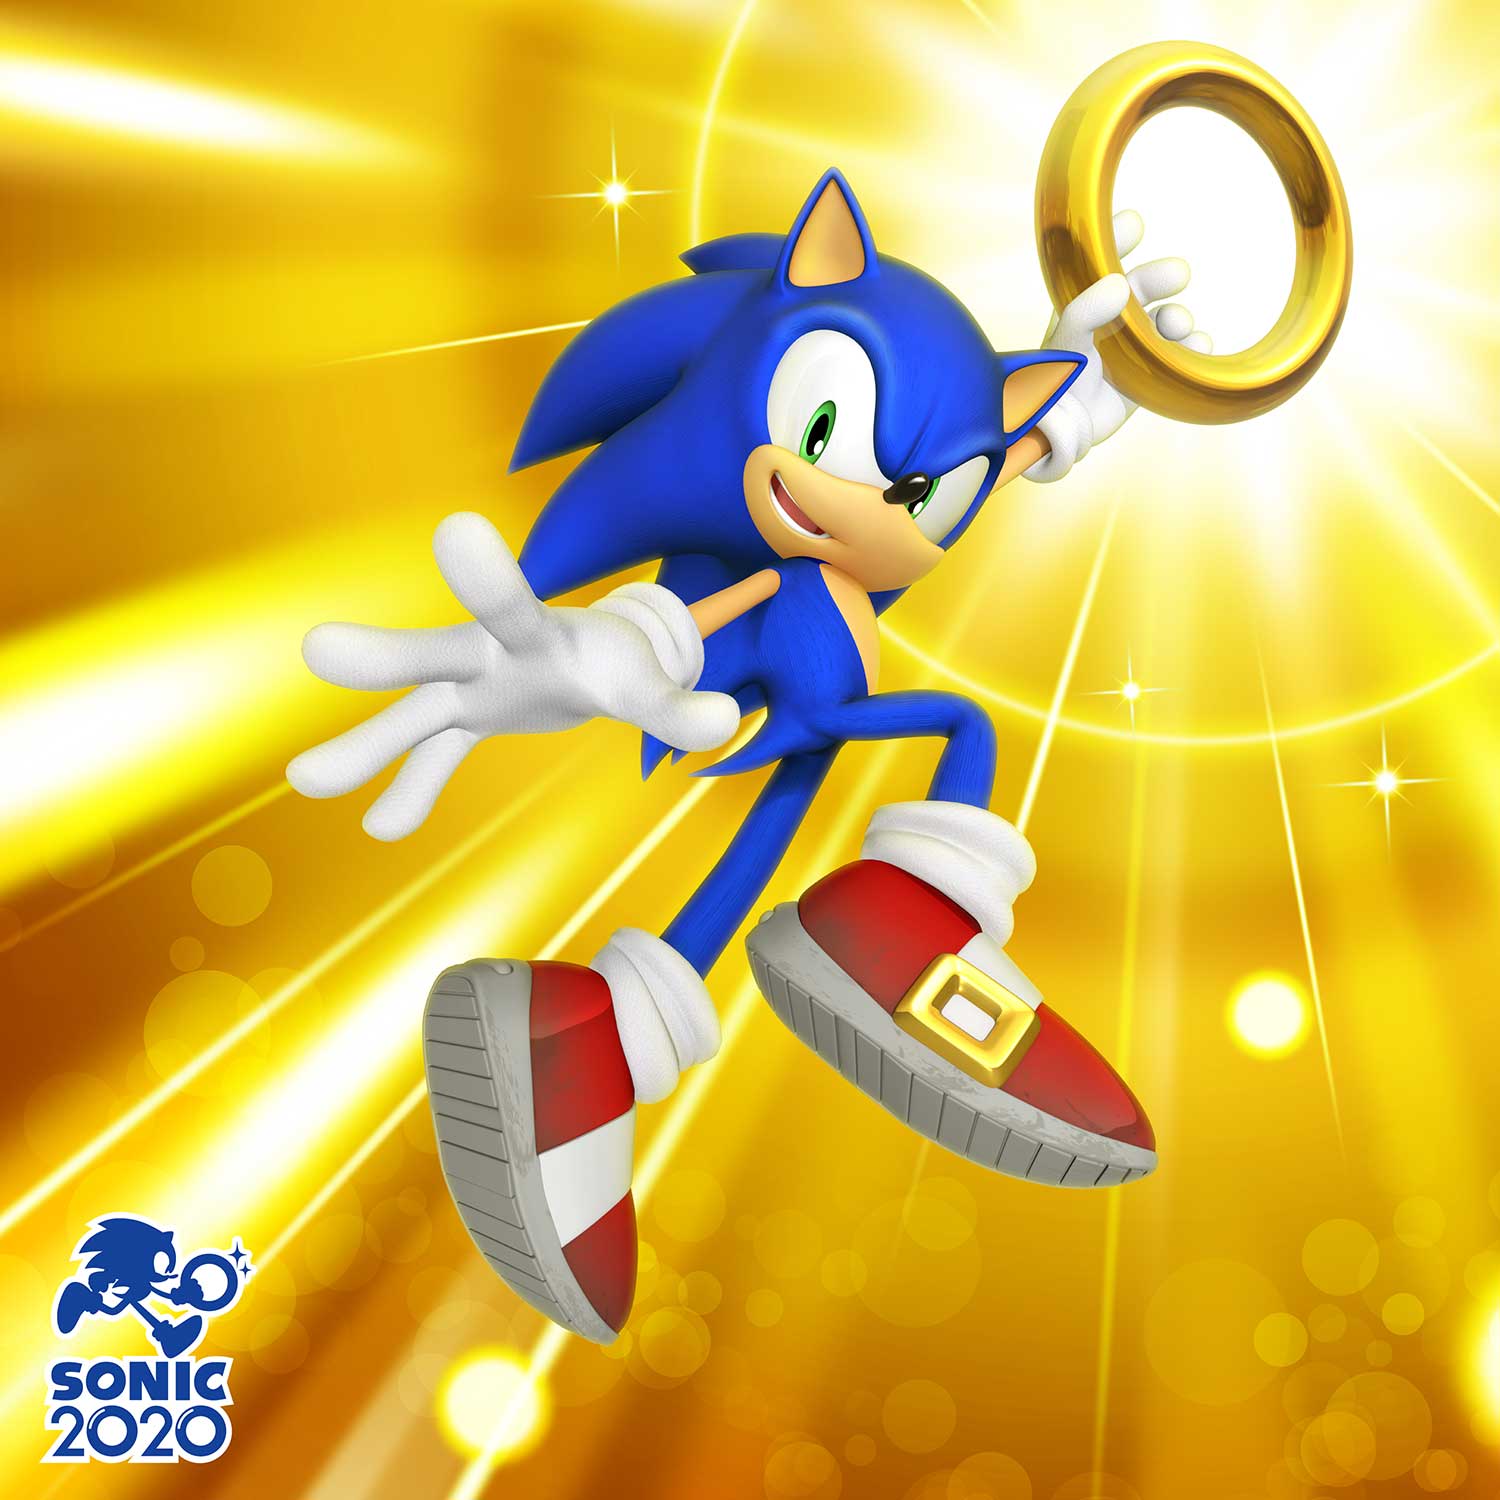 Sega launches Sonic 2020 initiative to announce Sonic the Hedgehog news ...